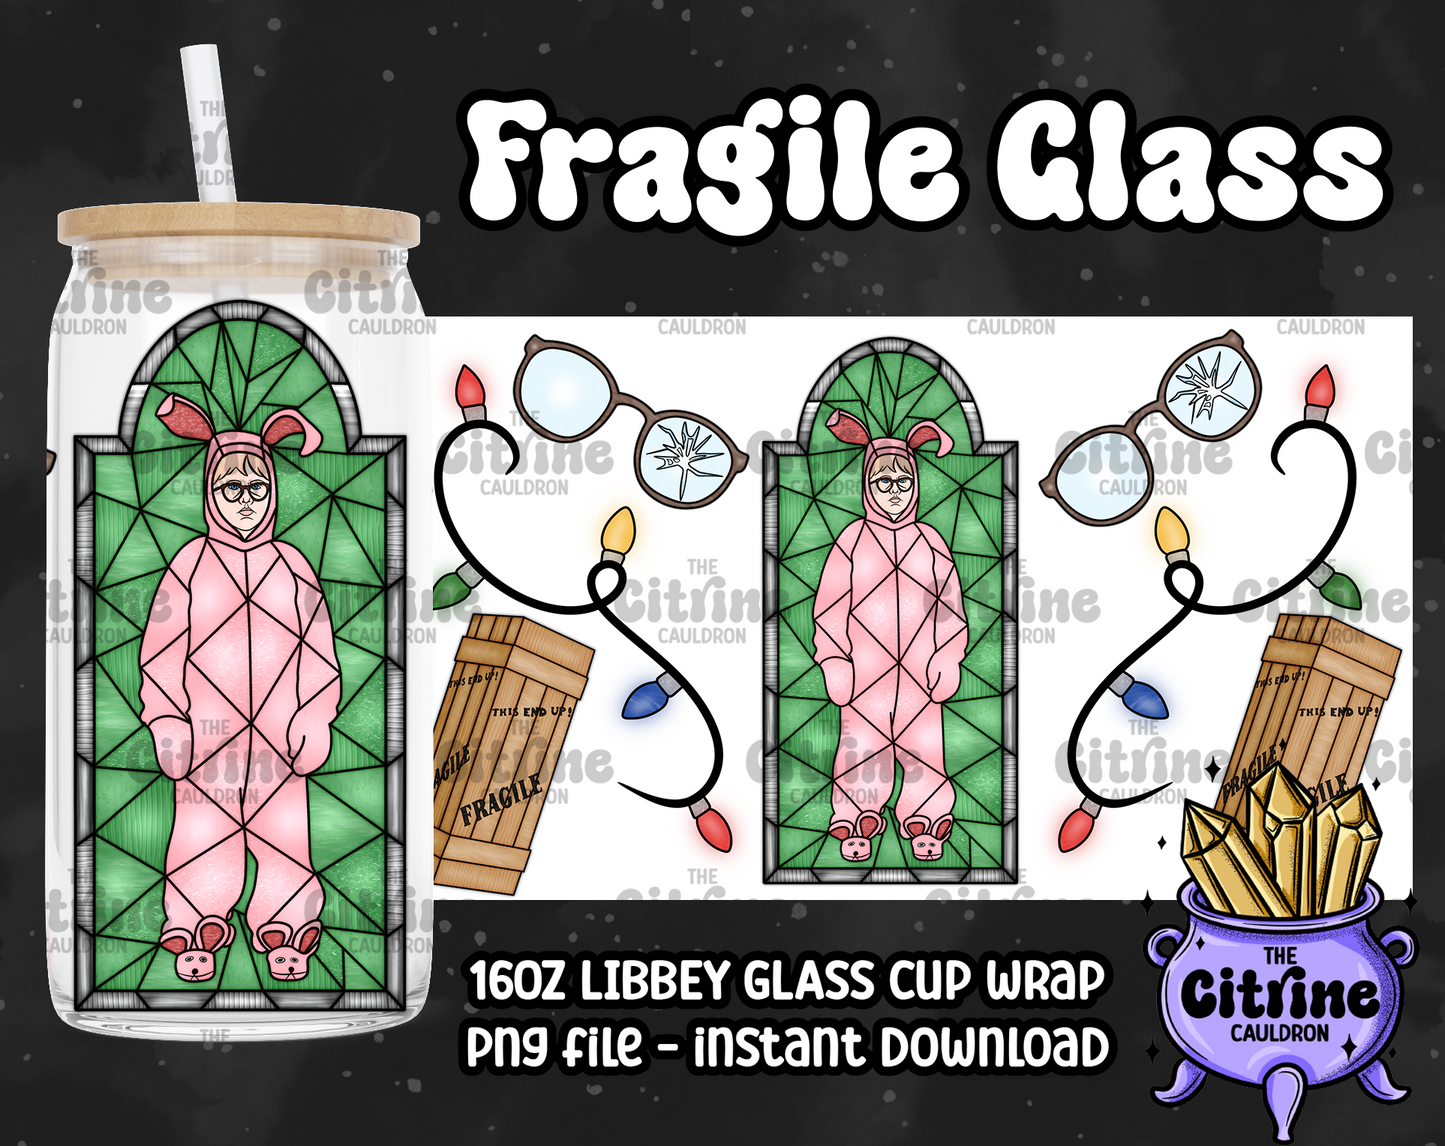 Fragile Glass - PNG Wrap for Libbey 16oz Glass Can